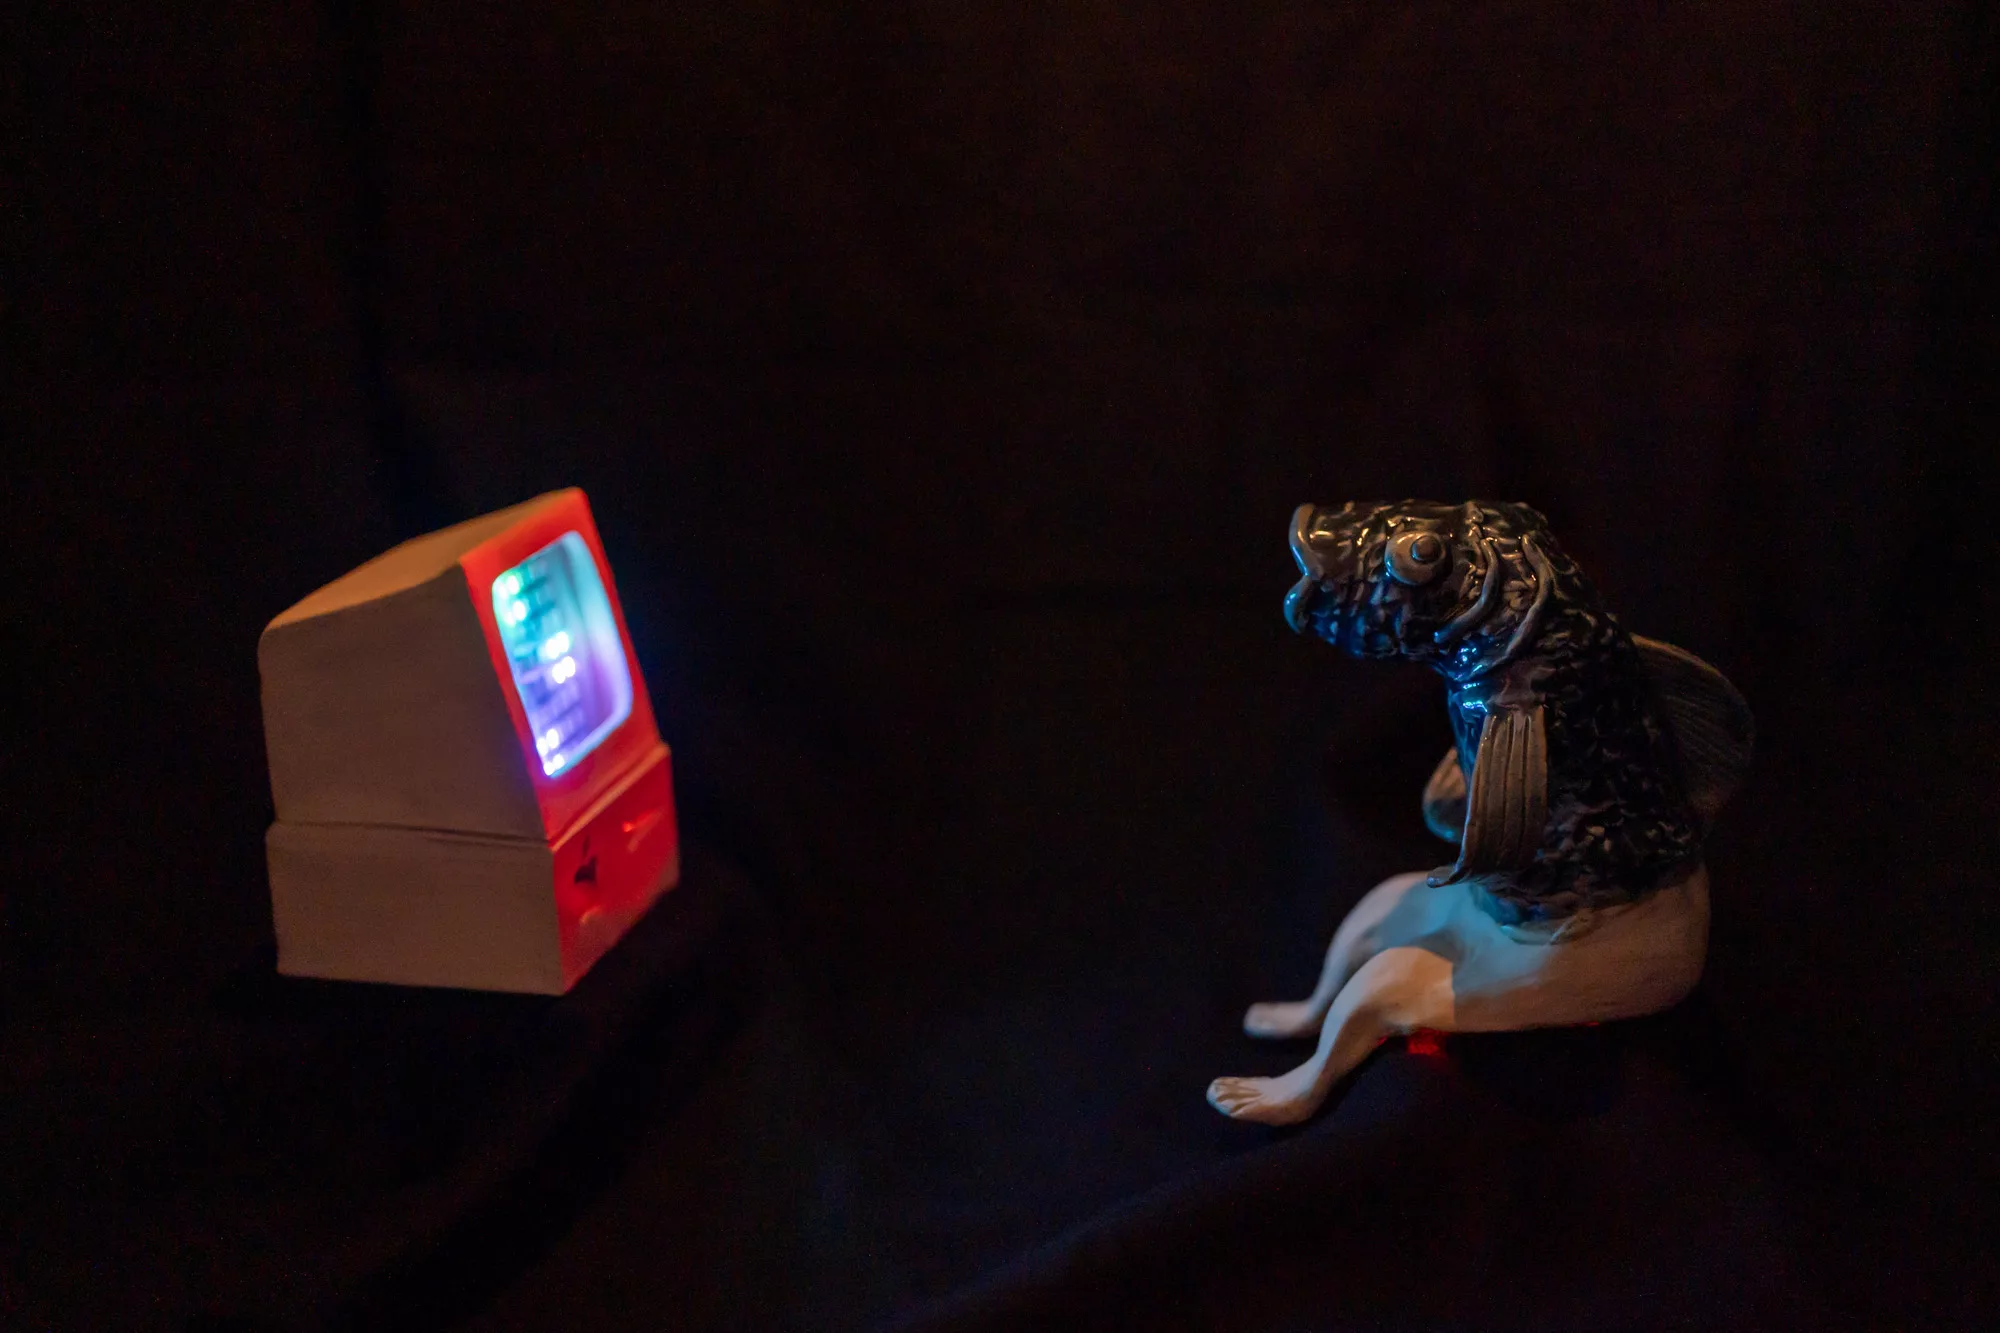 In a dark space, two ceramic sculptures face each other: a TV and an anthropomorphic figure with a fish head and human legs. LED lights shine from the TV screen.